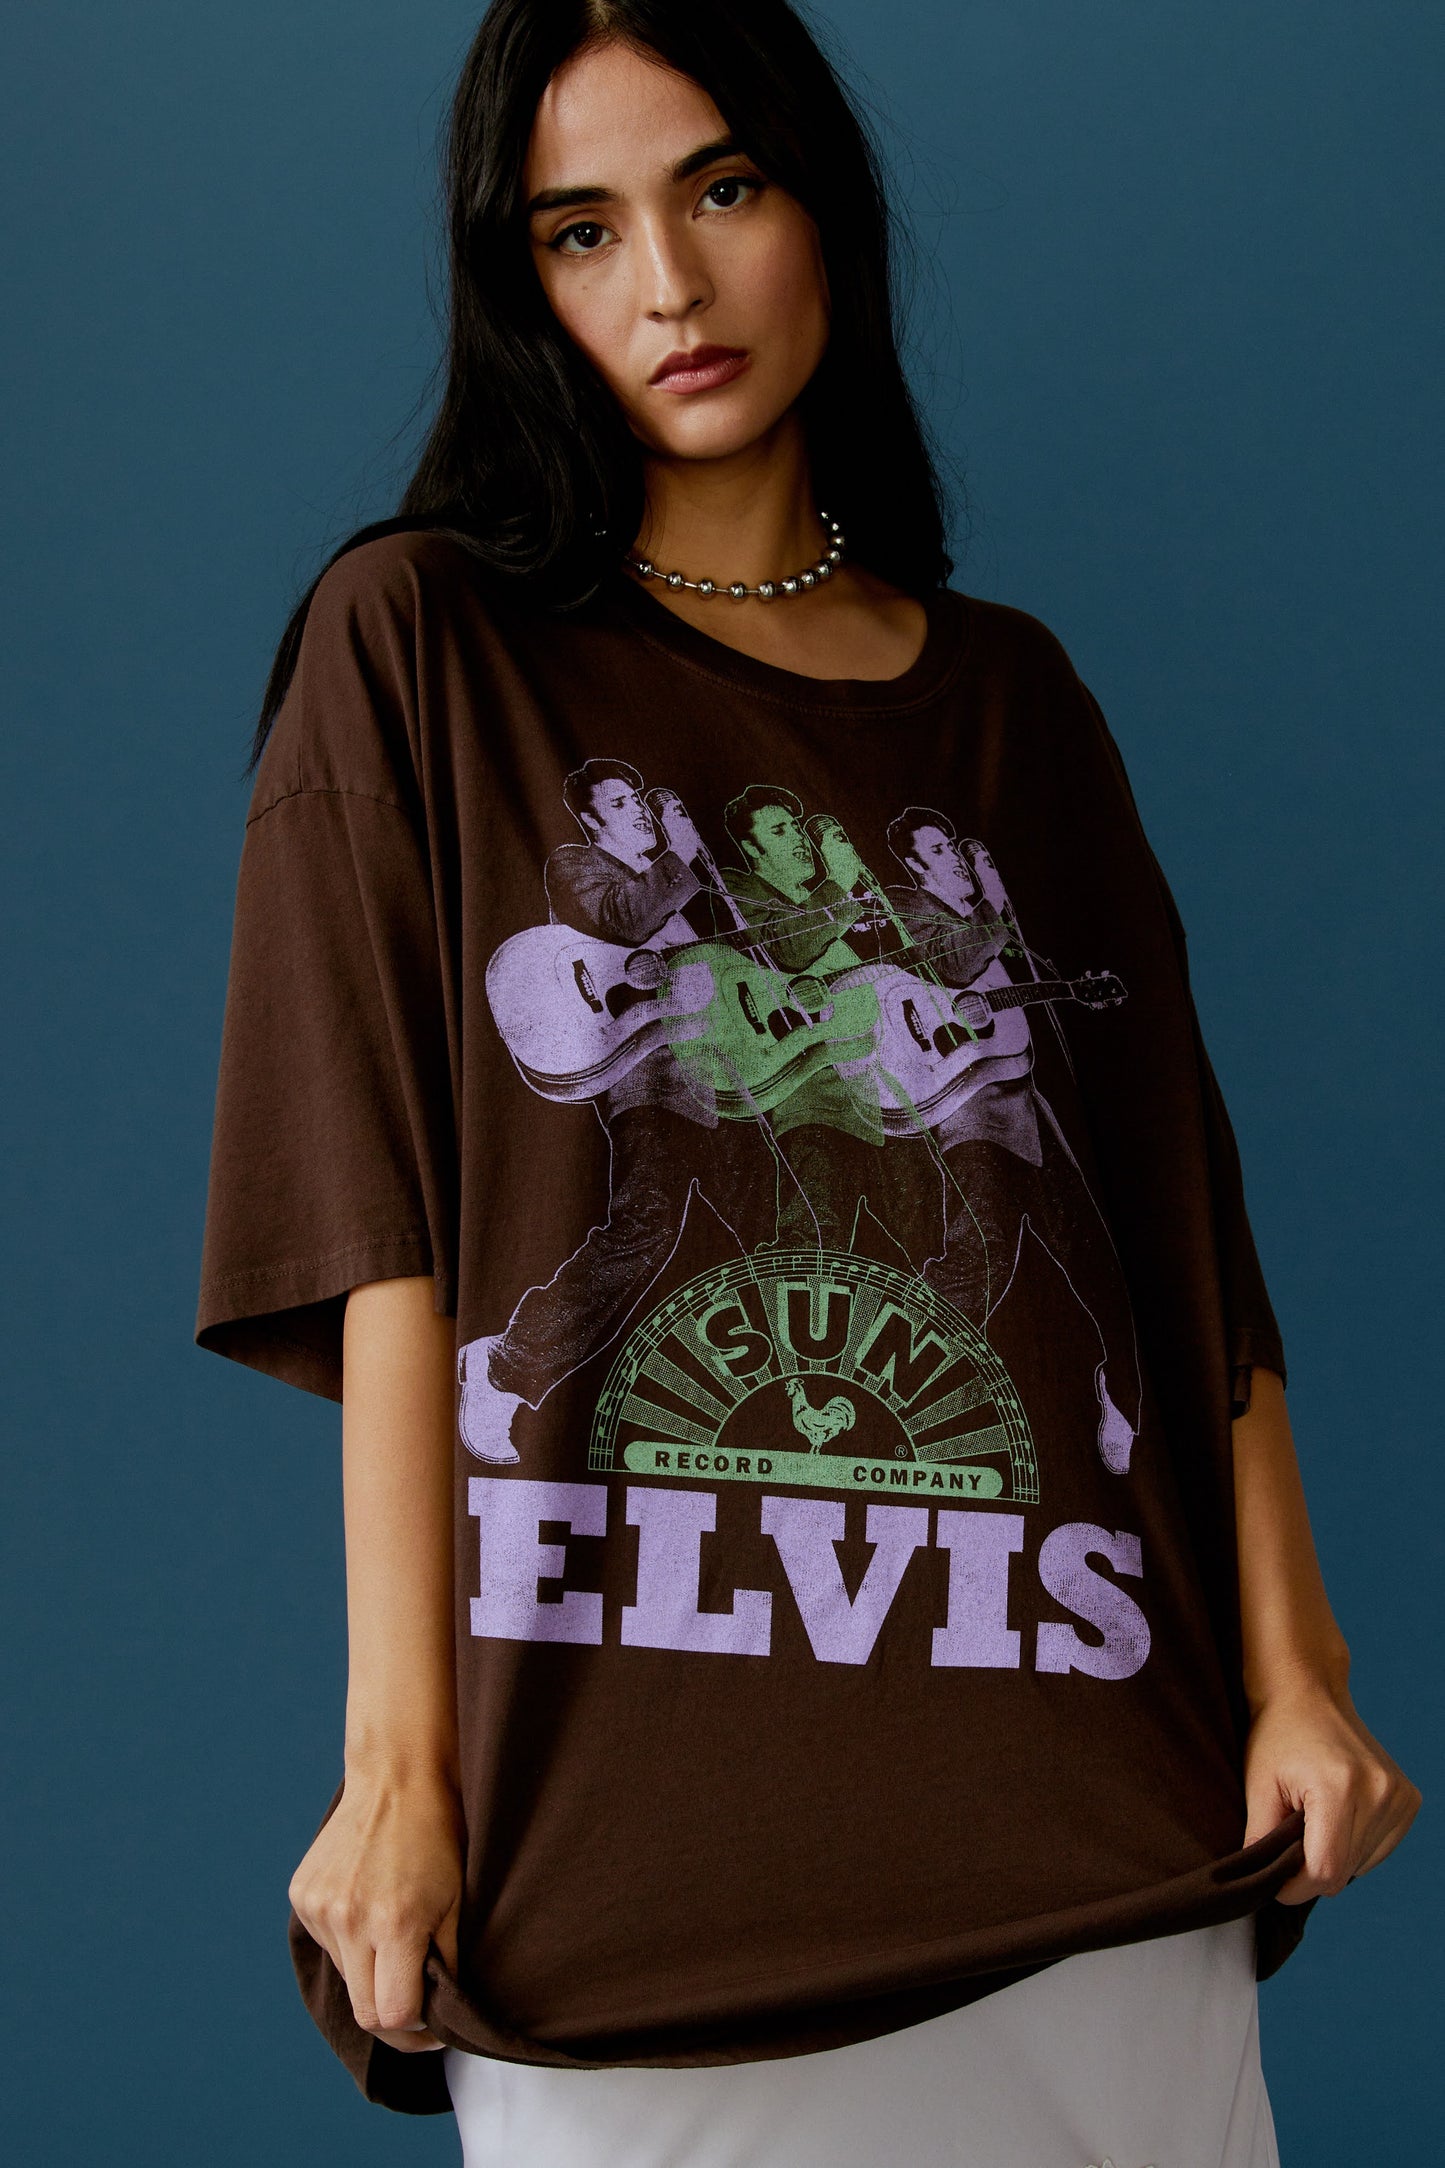 A dark-haired model featuring a brown tee stamped with the legendary artist's name and his iconic portrait in green and purple inks.